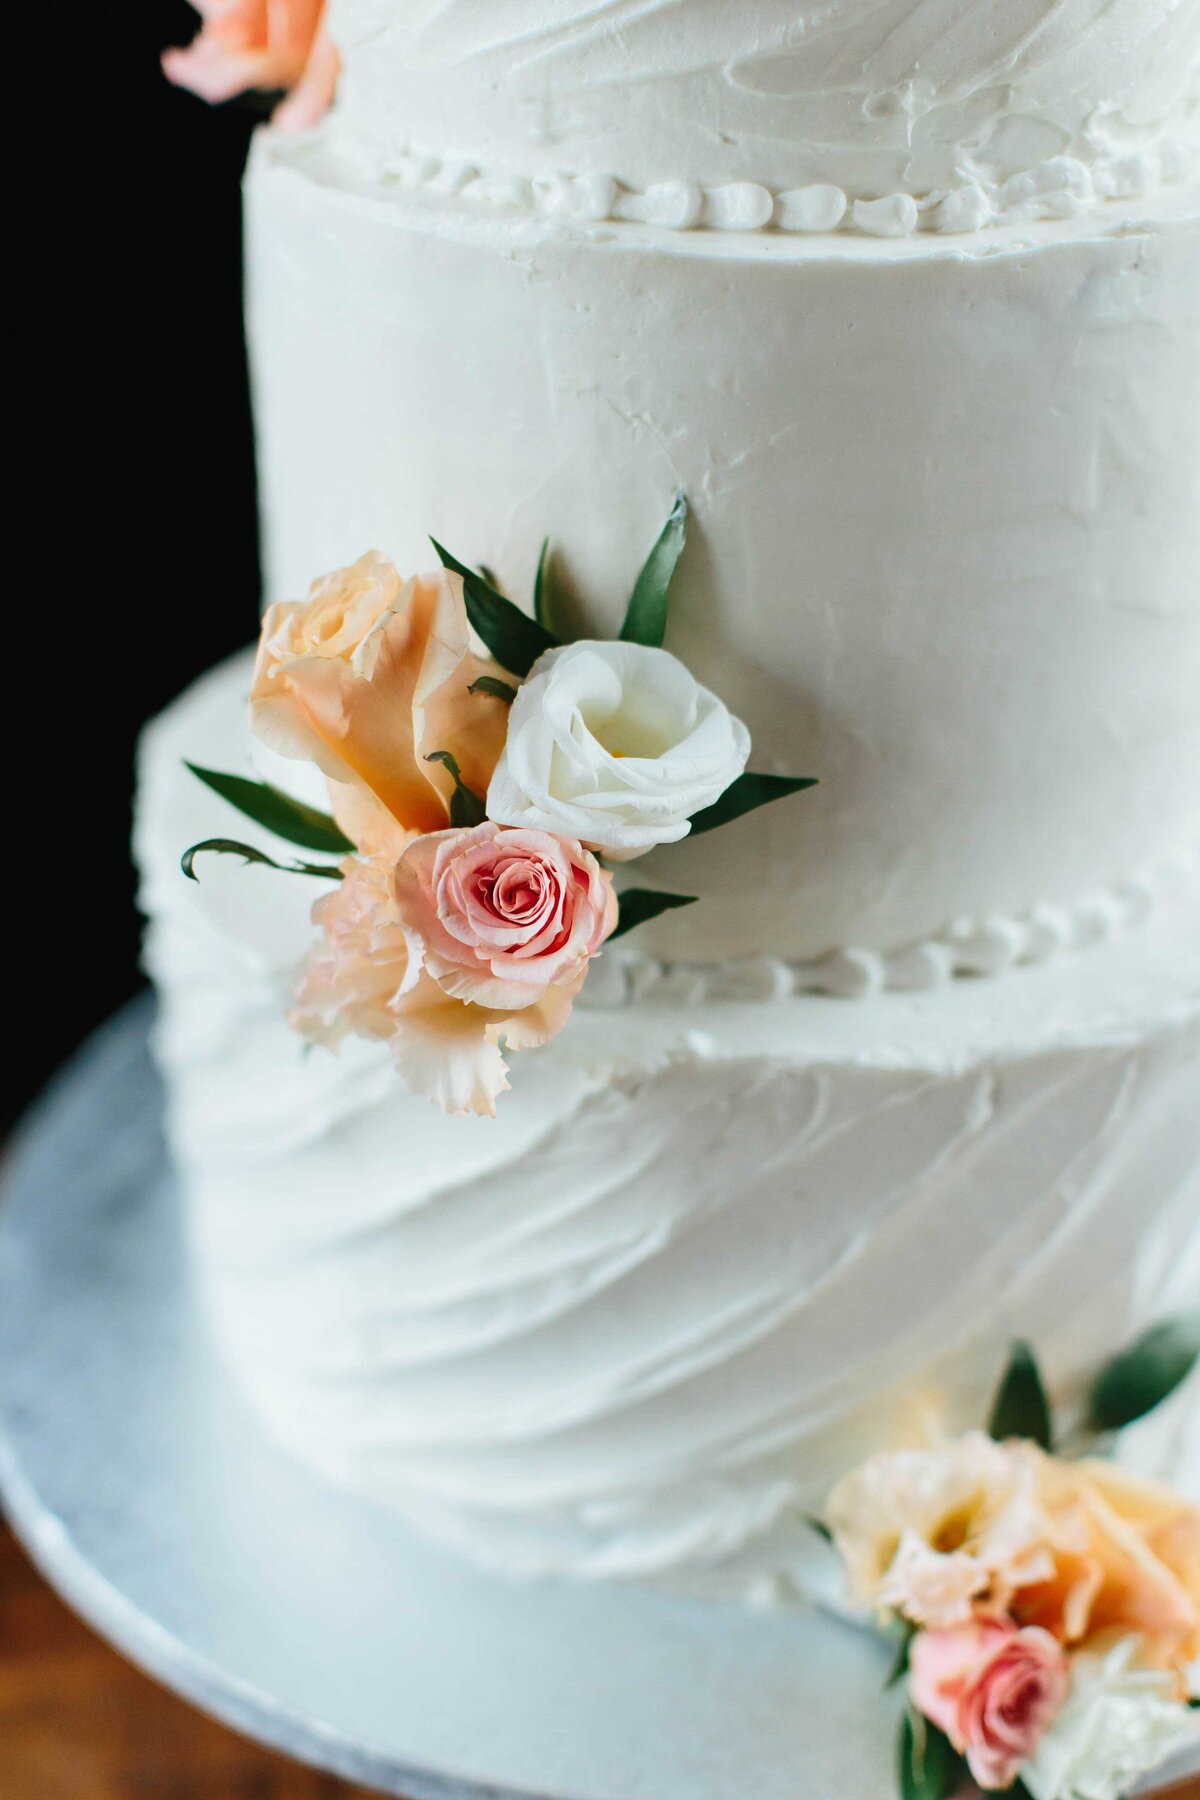 Close up detail picture of wedding cake with white and orange flowers